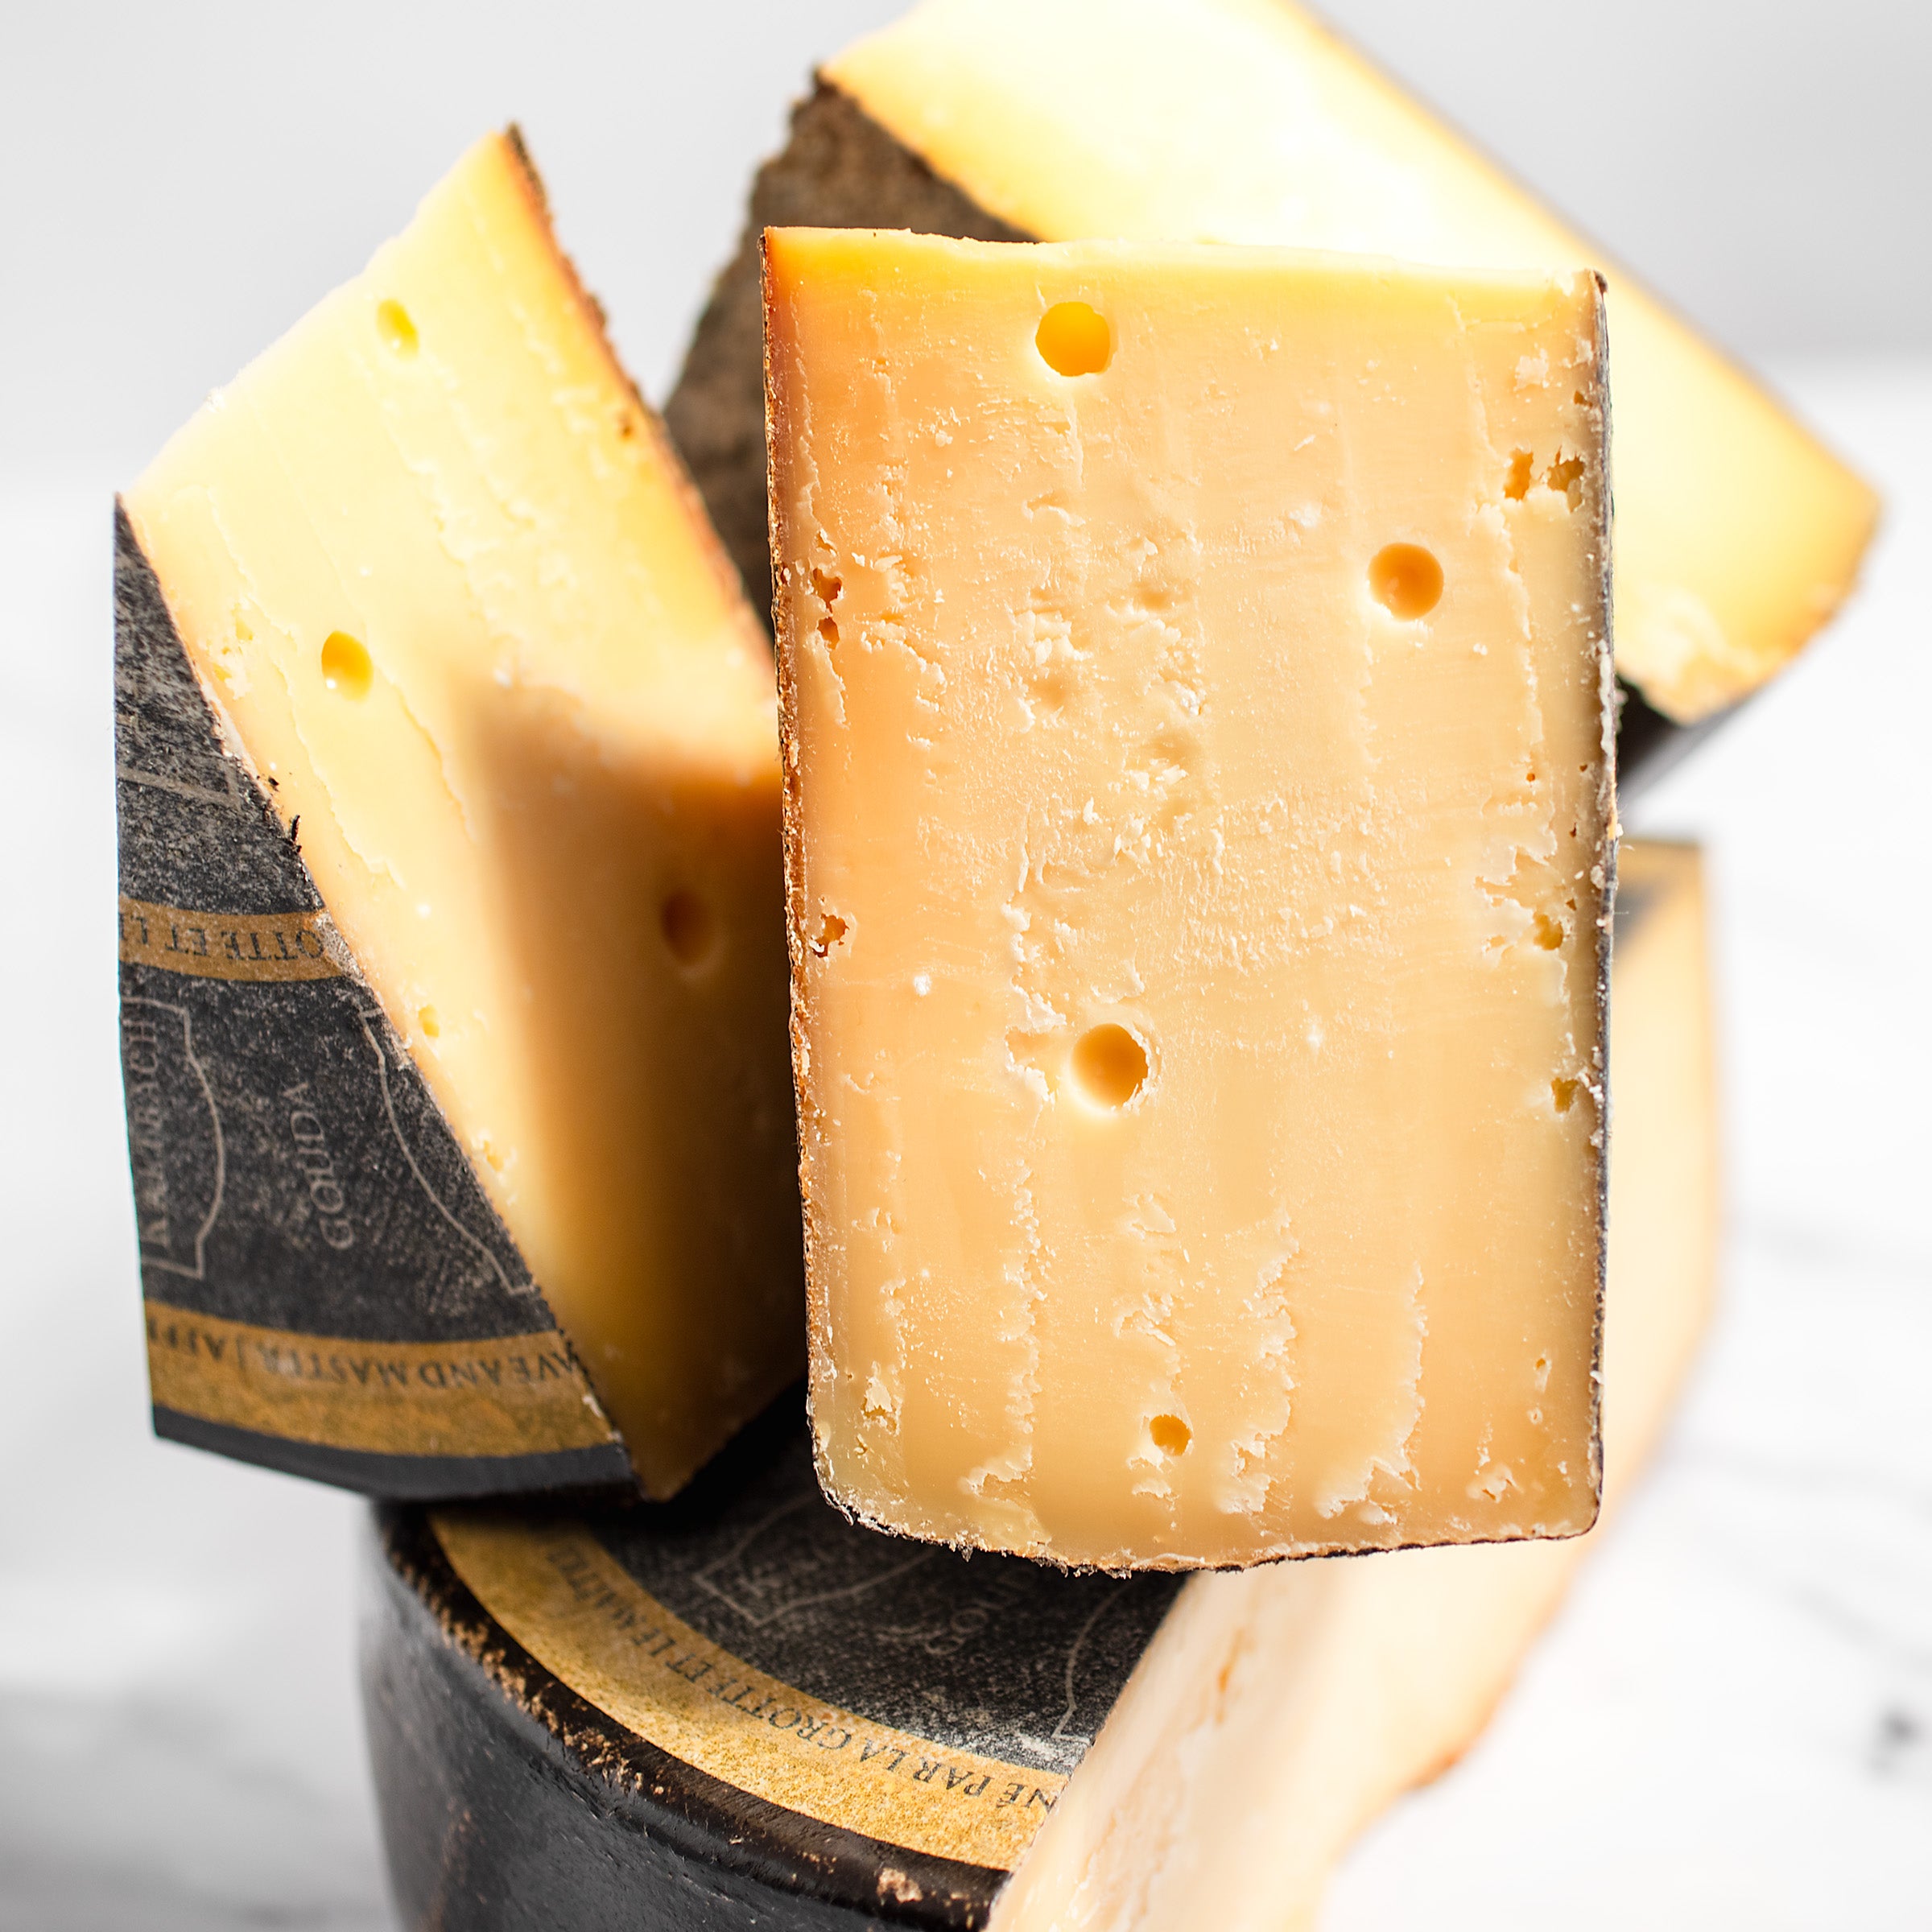 igourmet_15592_Kaltbach Swiss Cave Aged Gouda Cheese by Emma_cut and wrapped by igourmet_cheese